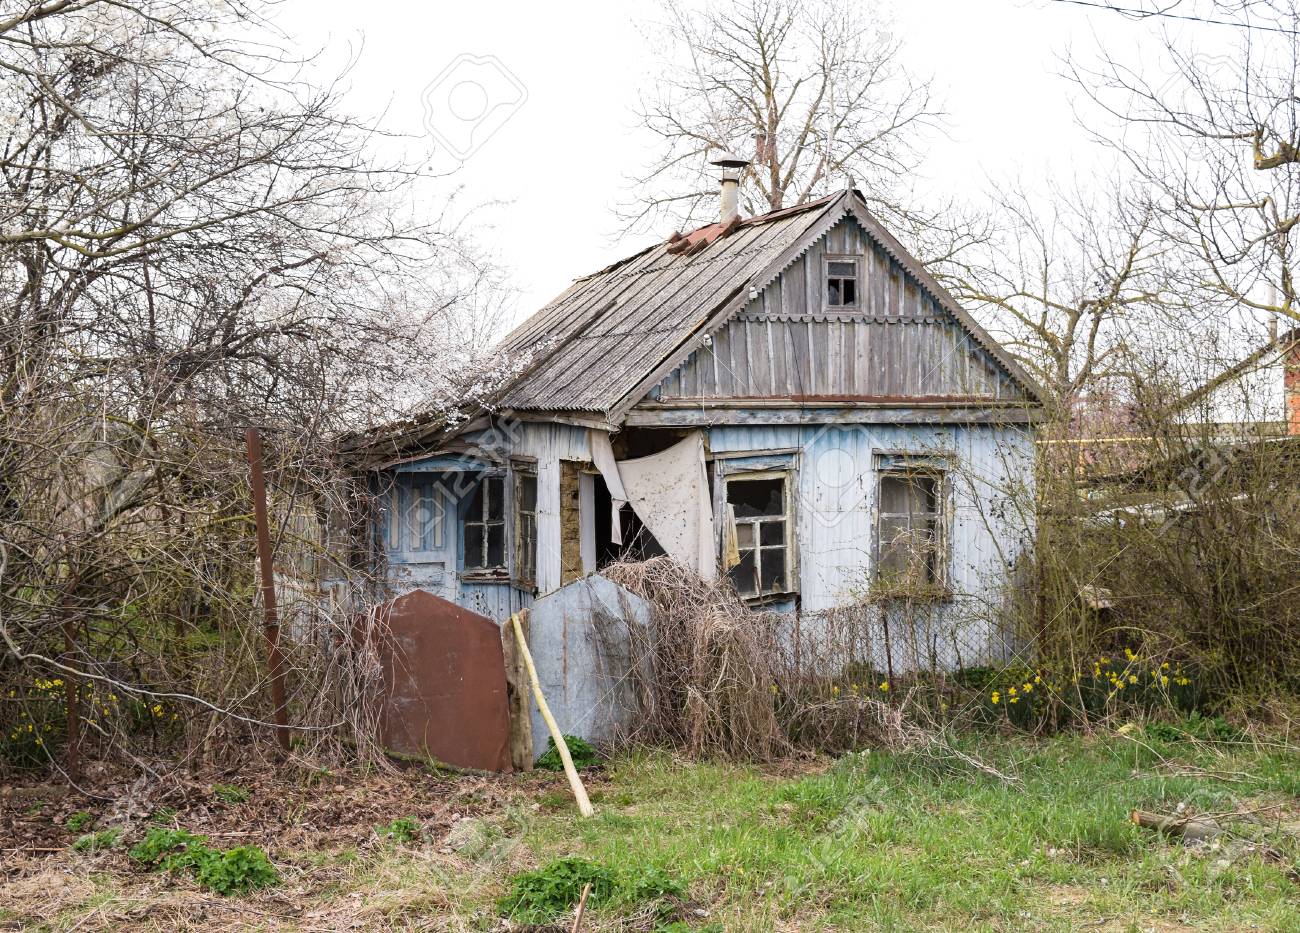 68603724-old-abandoned-house-in-the-village-destroys-house-.jpg